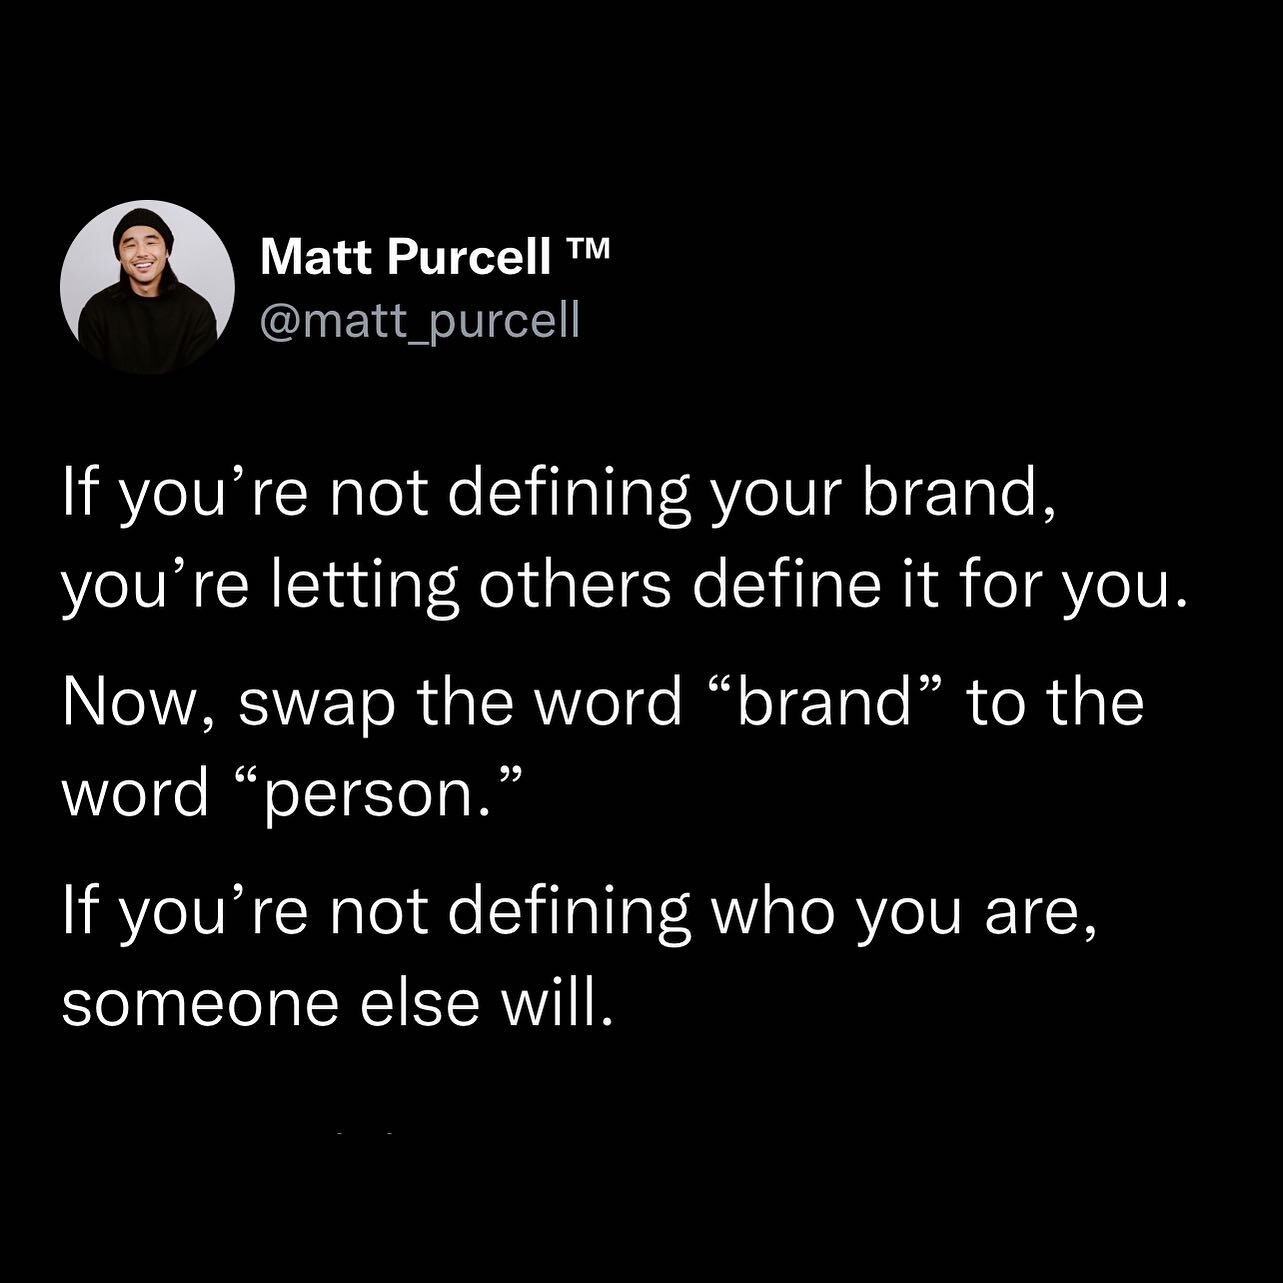 To market anything&mdash;a product, a person, a biz &mdash;you first need to define your brand. Once you define your brand you'll be able to create a foundation for all your marketing efforts and strategies!

Don&rsquo;t copy someone else&rsquo;s per